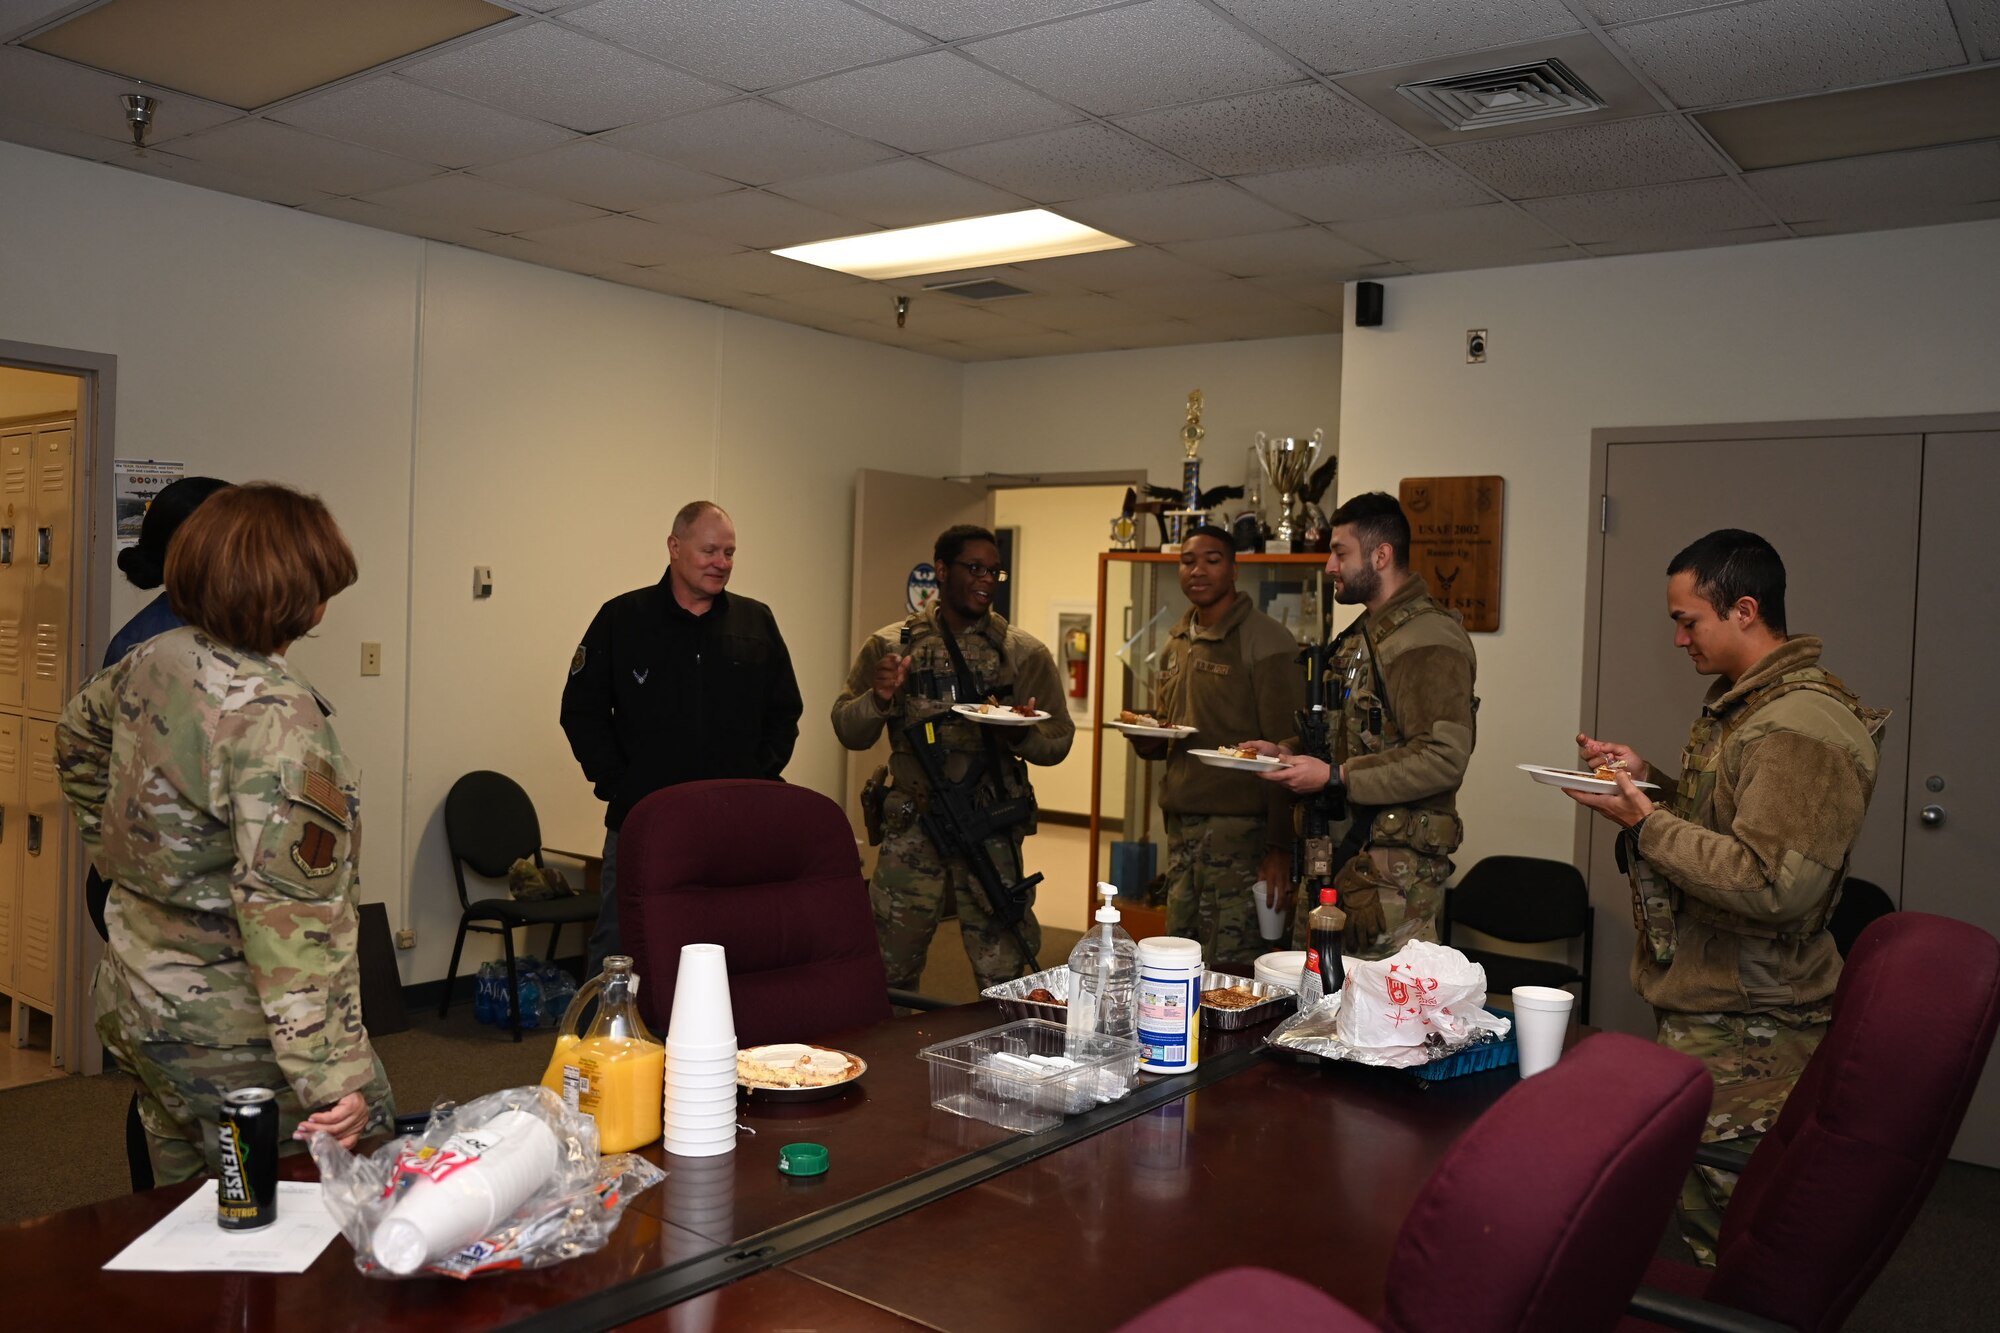 U.S Air Force Col. Angelina Maguinness, 17th Training Wing commander, and Chief Master Sgt. Khammilla Washington, 17th TRW command chief, talks to the 17th Security Forces Squadron Airmen during breakfast on Thanksgiving morning at the 17th SFS building, Goodfellow Air Force Base, Texas, Nov. 23, 2023. The command team showed their support to Goodfellow’s defenders, working hard to support the 17th TRW mission. (U.S. Air Force photo by Airman 1st Class Evelyn D’Errico)